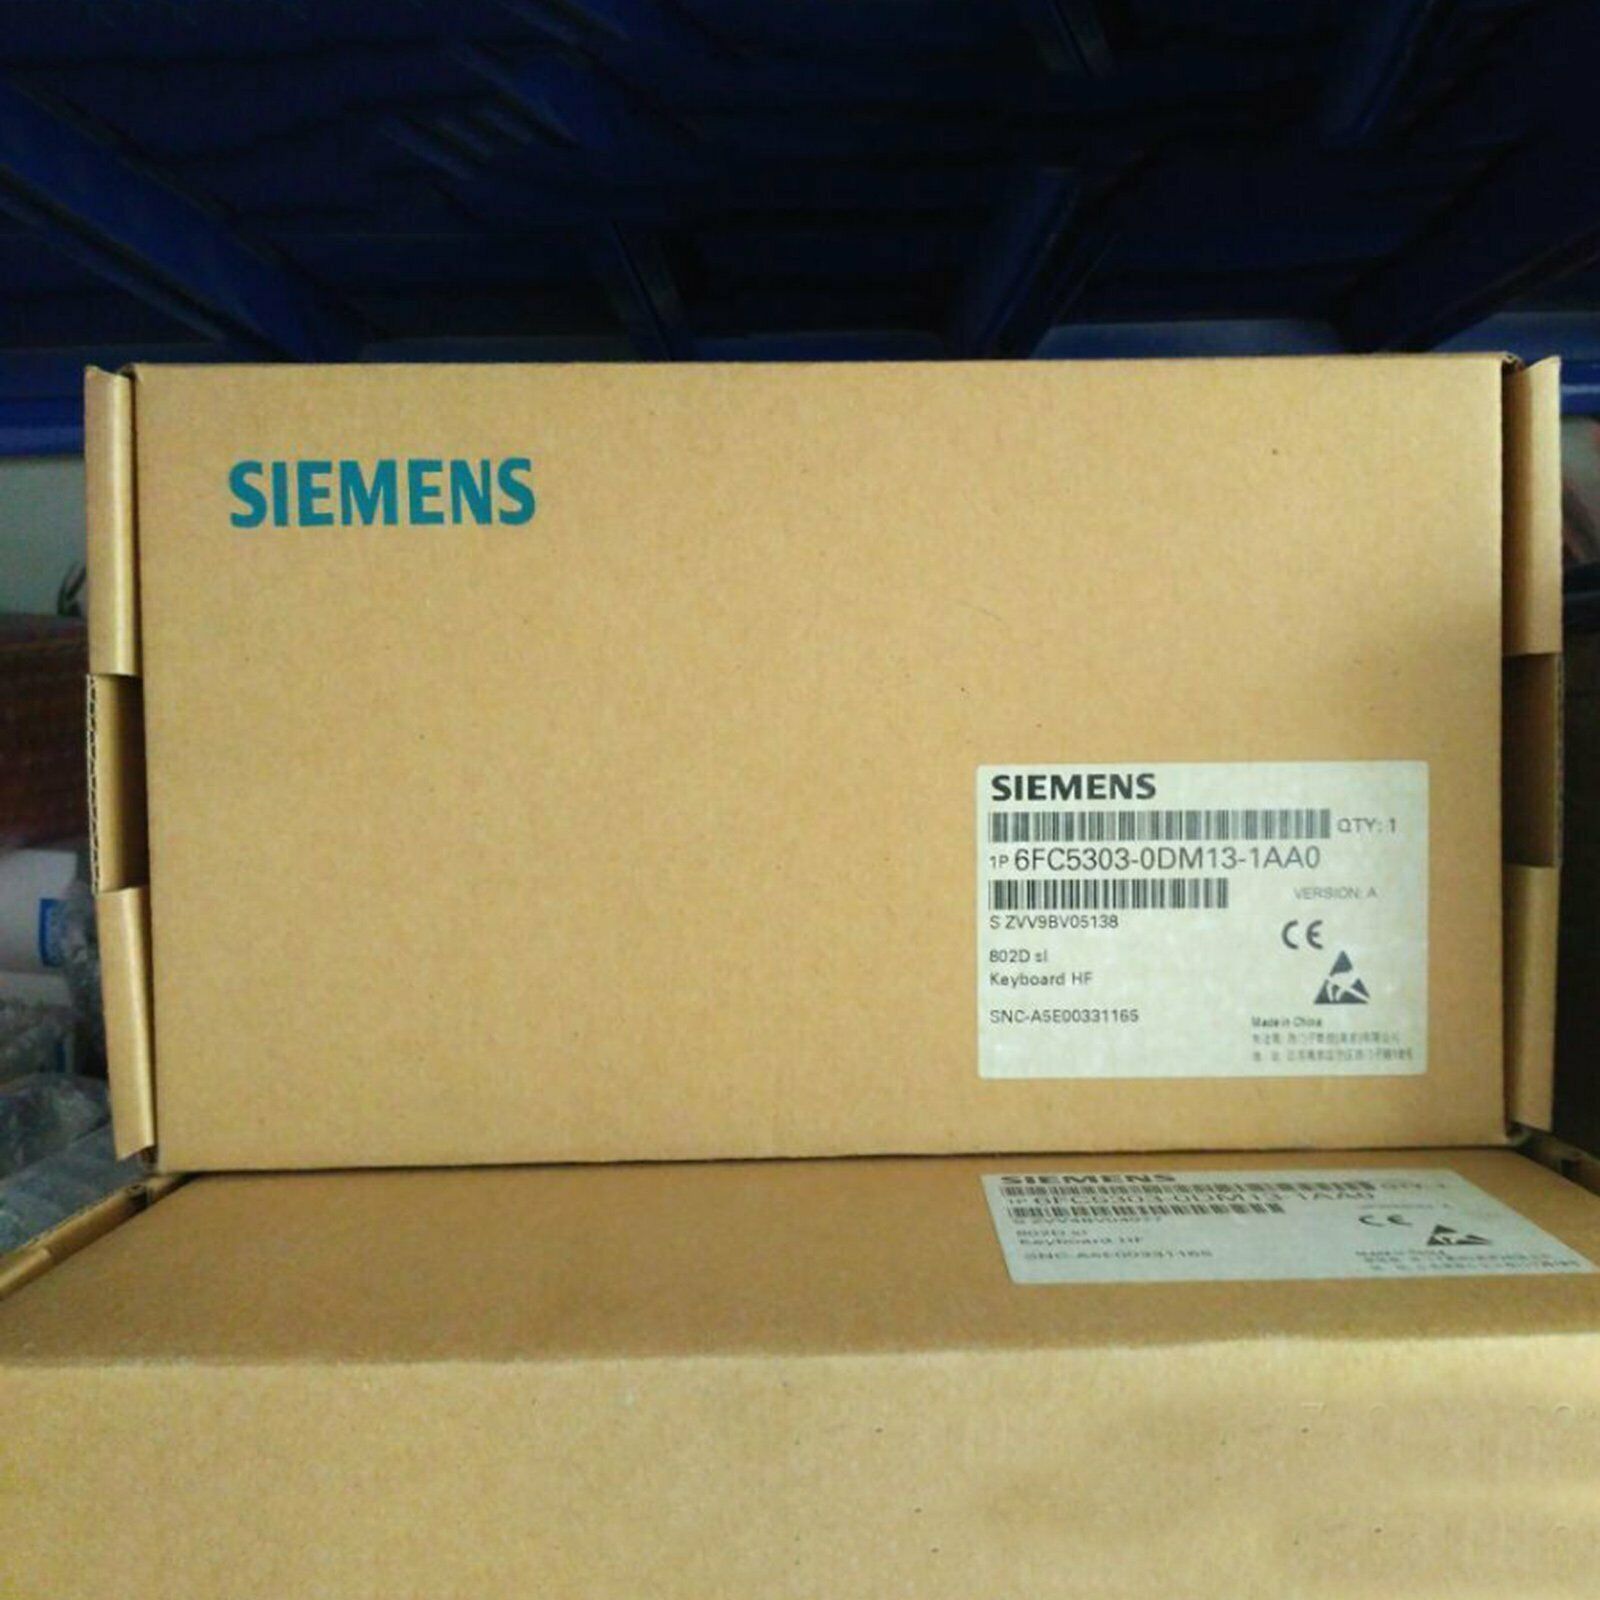 6FC5 303-0DM13-1AA0 KOEED 500+, 90%, import_2020_10_10_031751, Other, Siemens